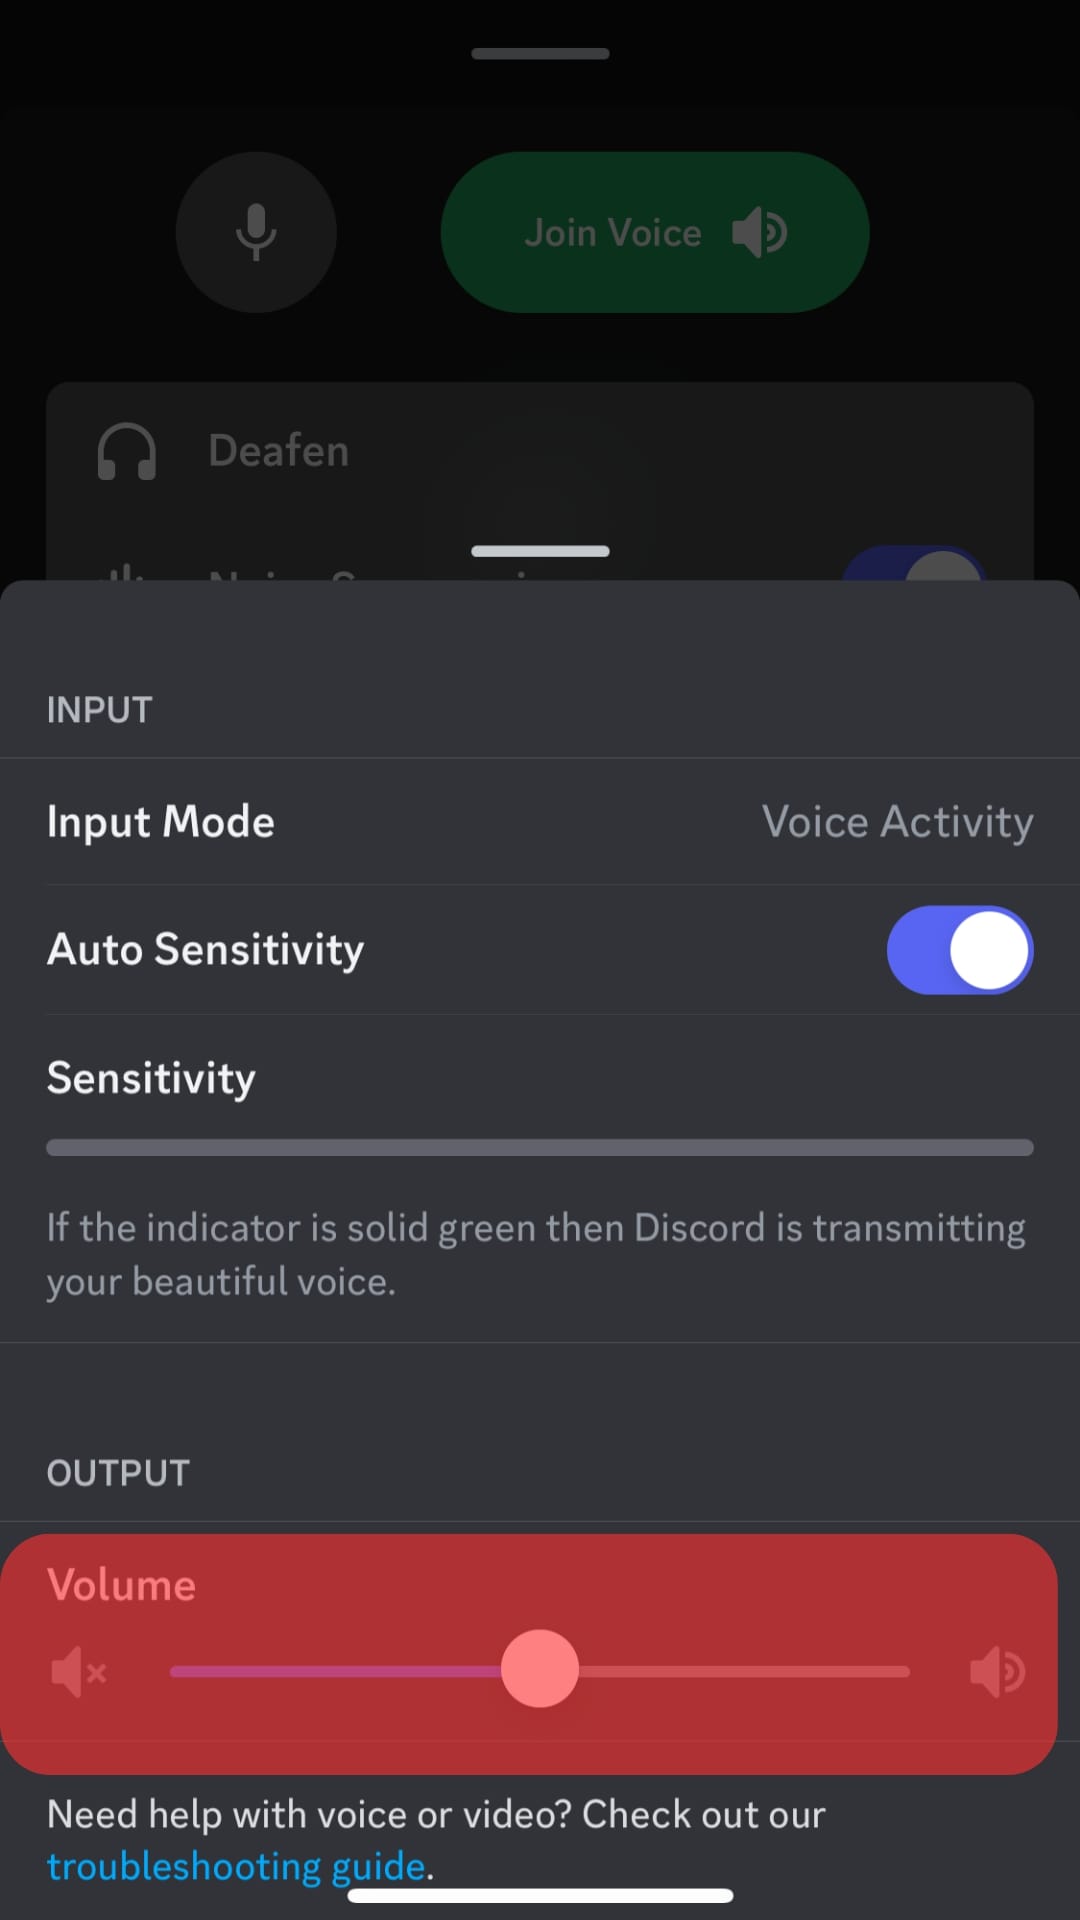 Adjust The Volume In The Output Section.